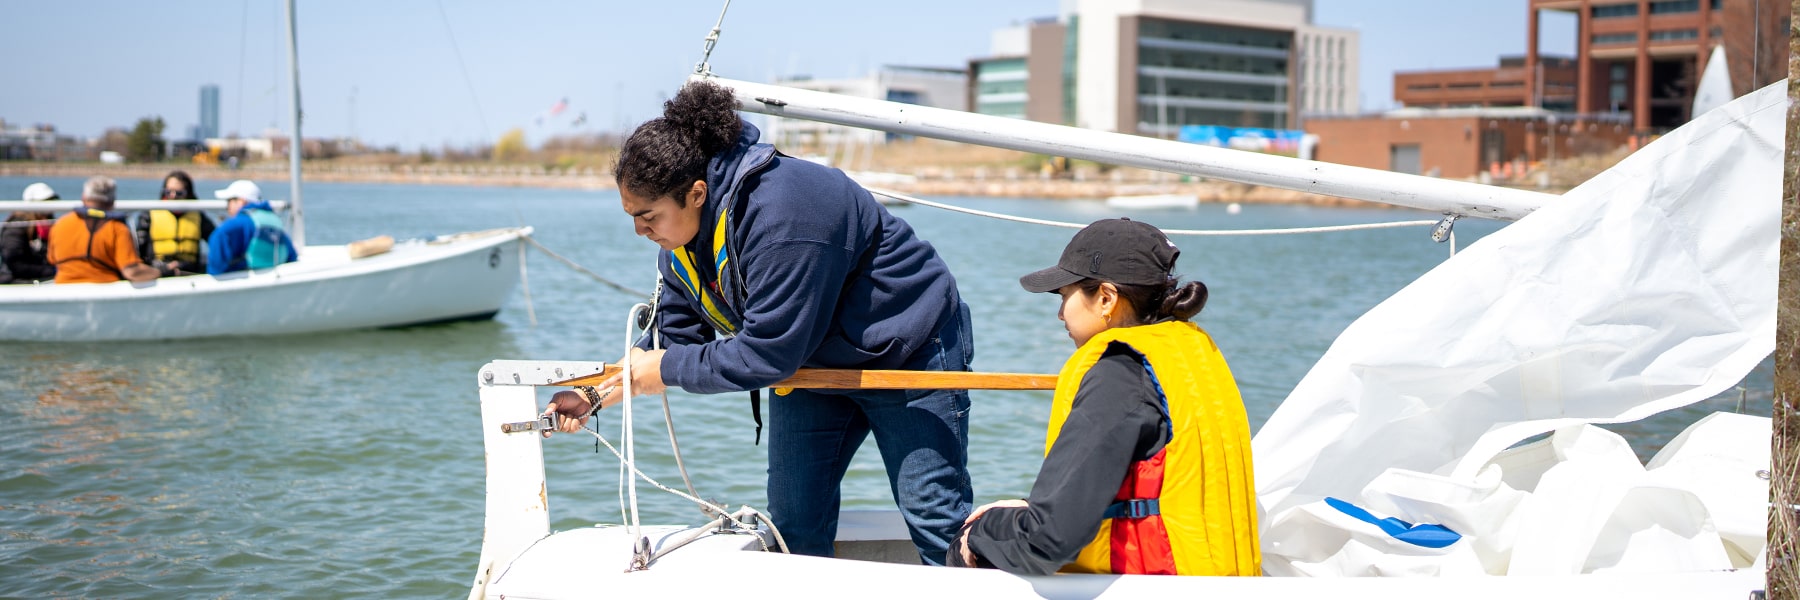 Two students work on sailboat in water near UMass Boston.